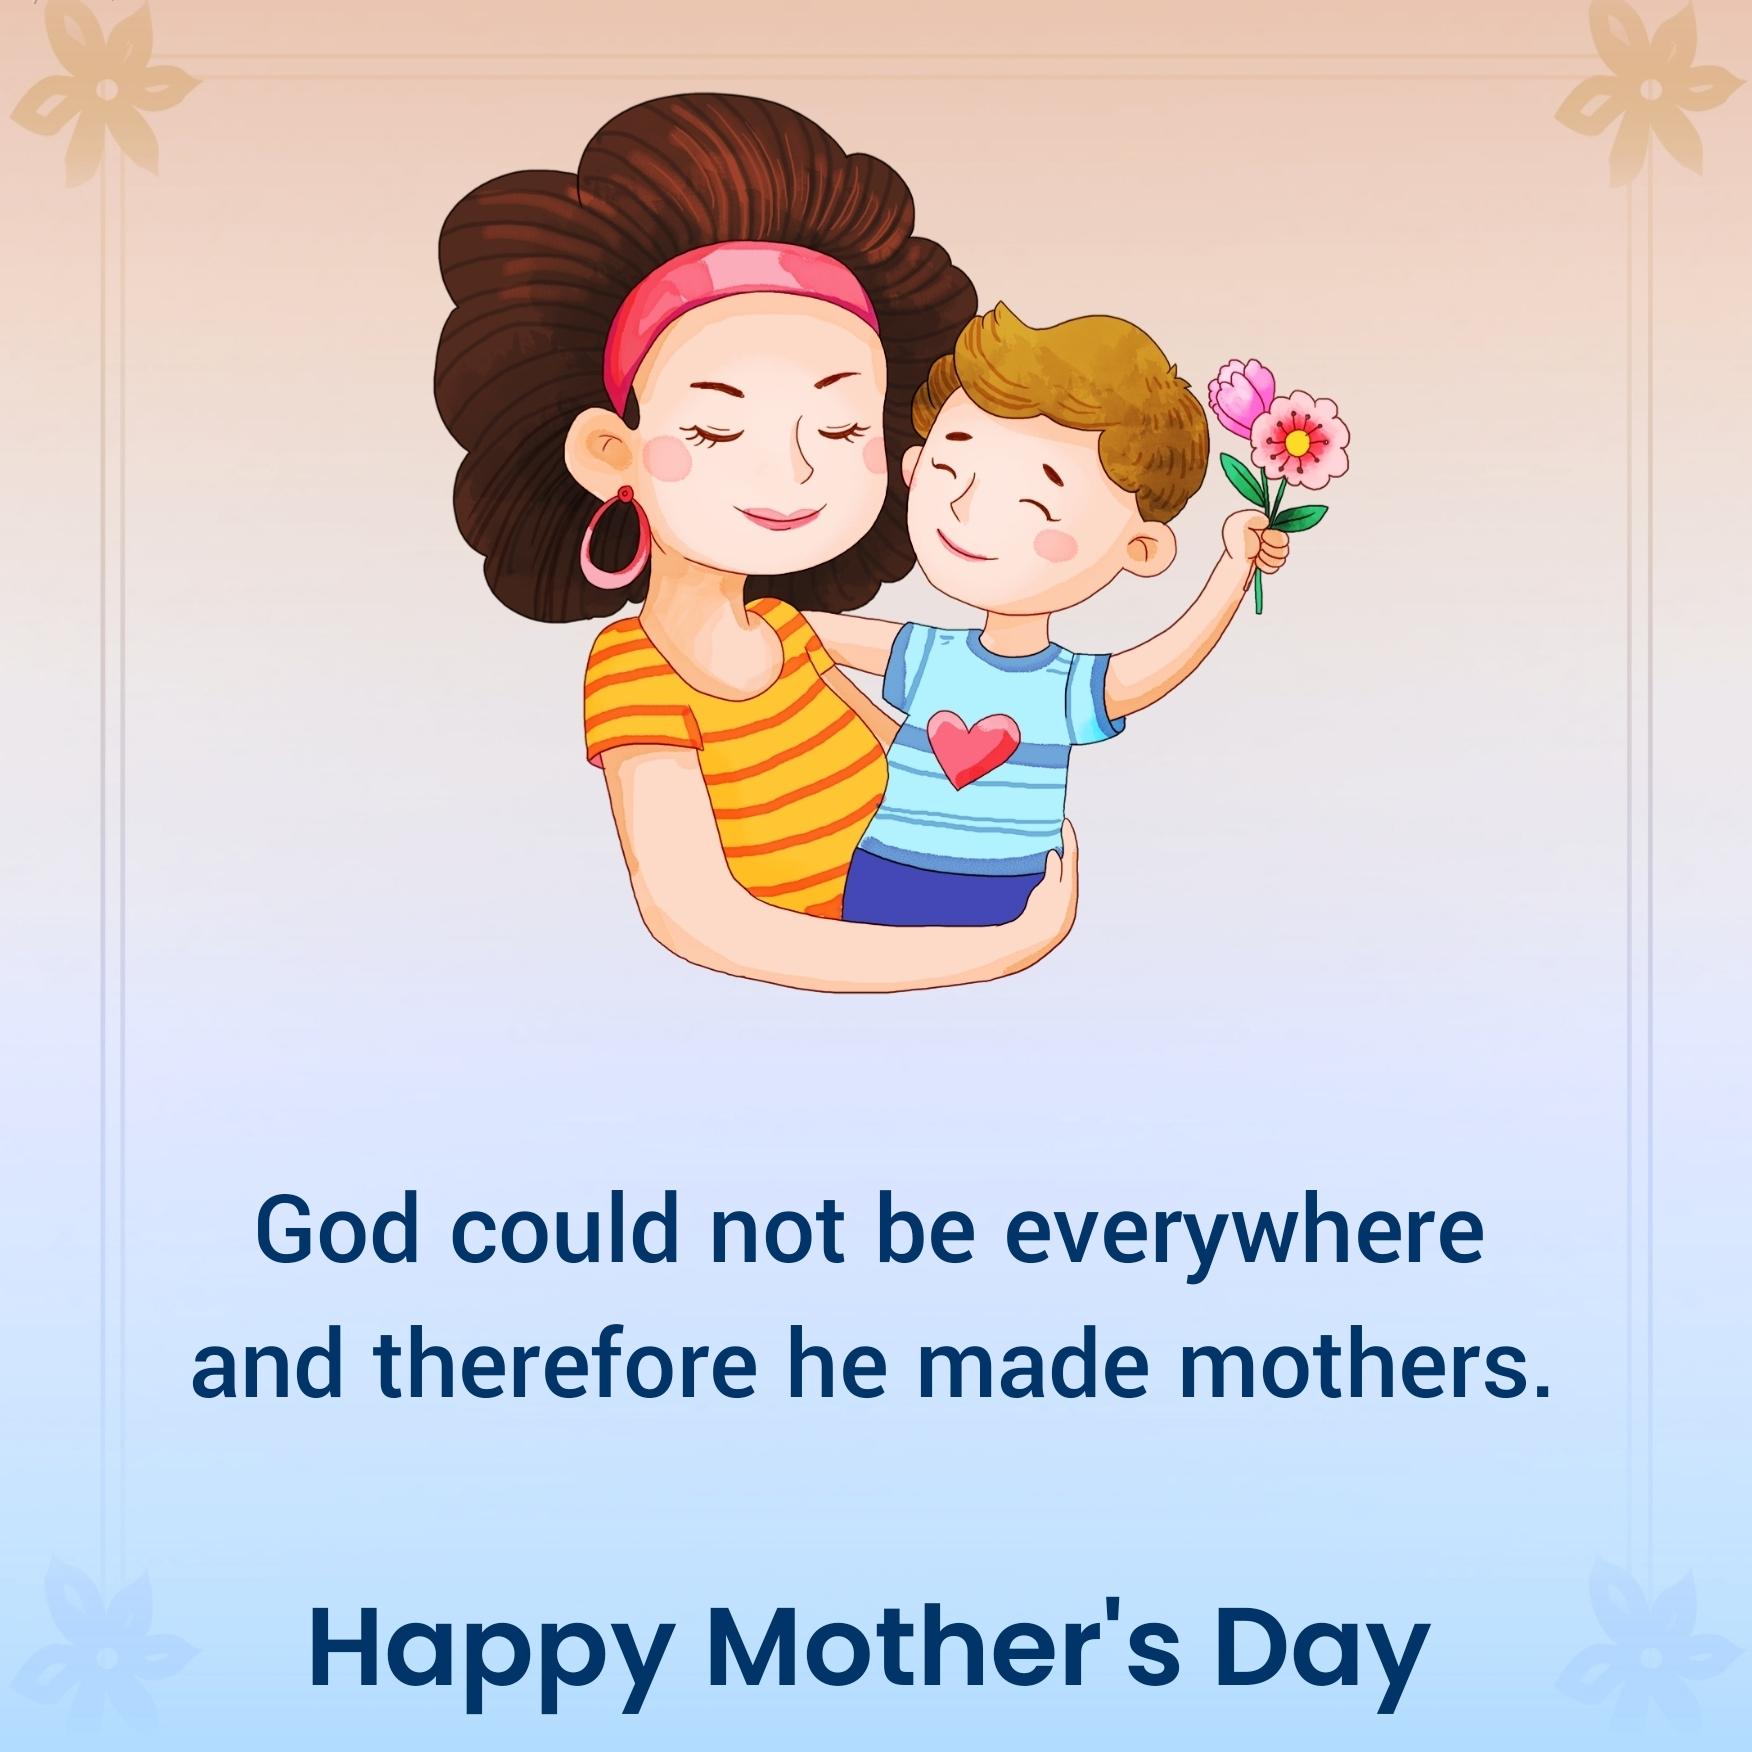 God could not be everywhere and therefore he made mothers